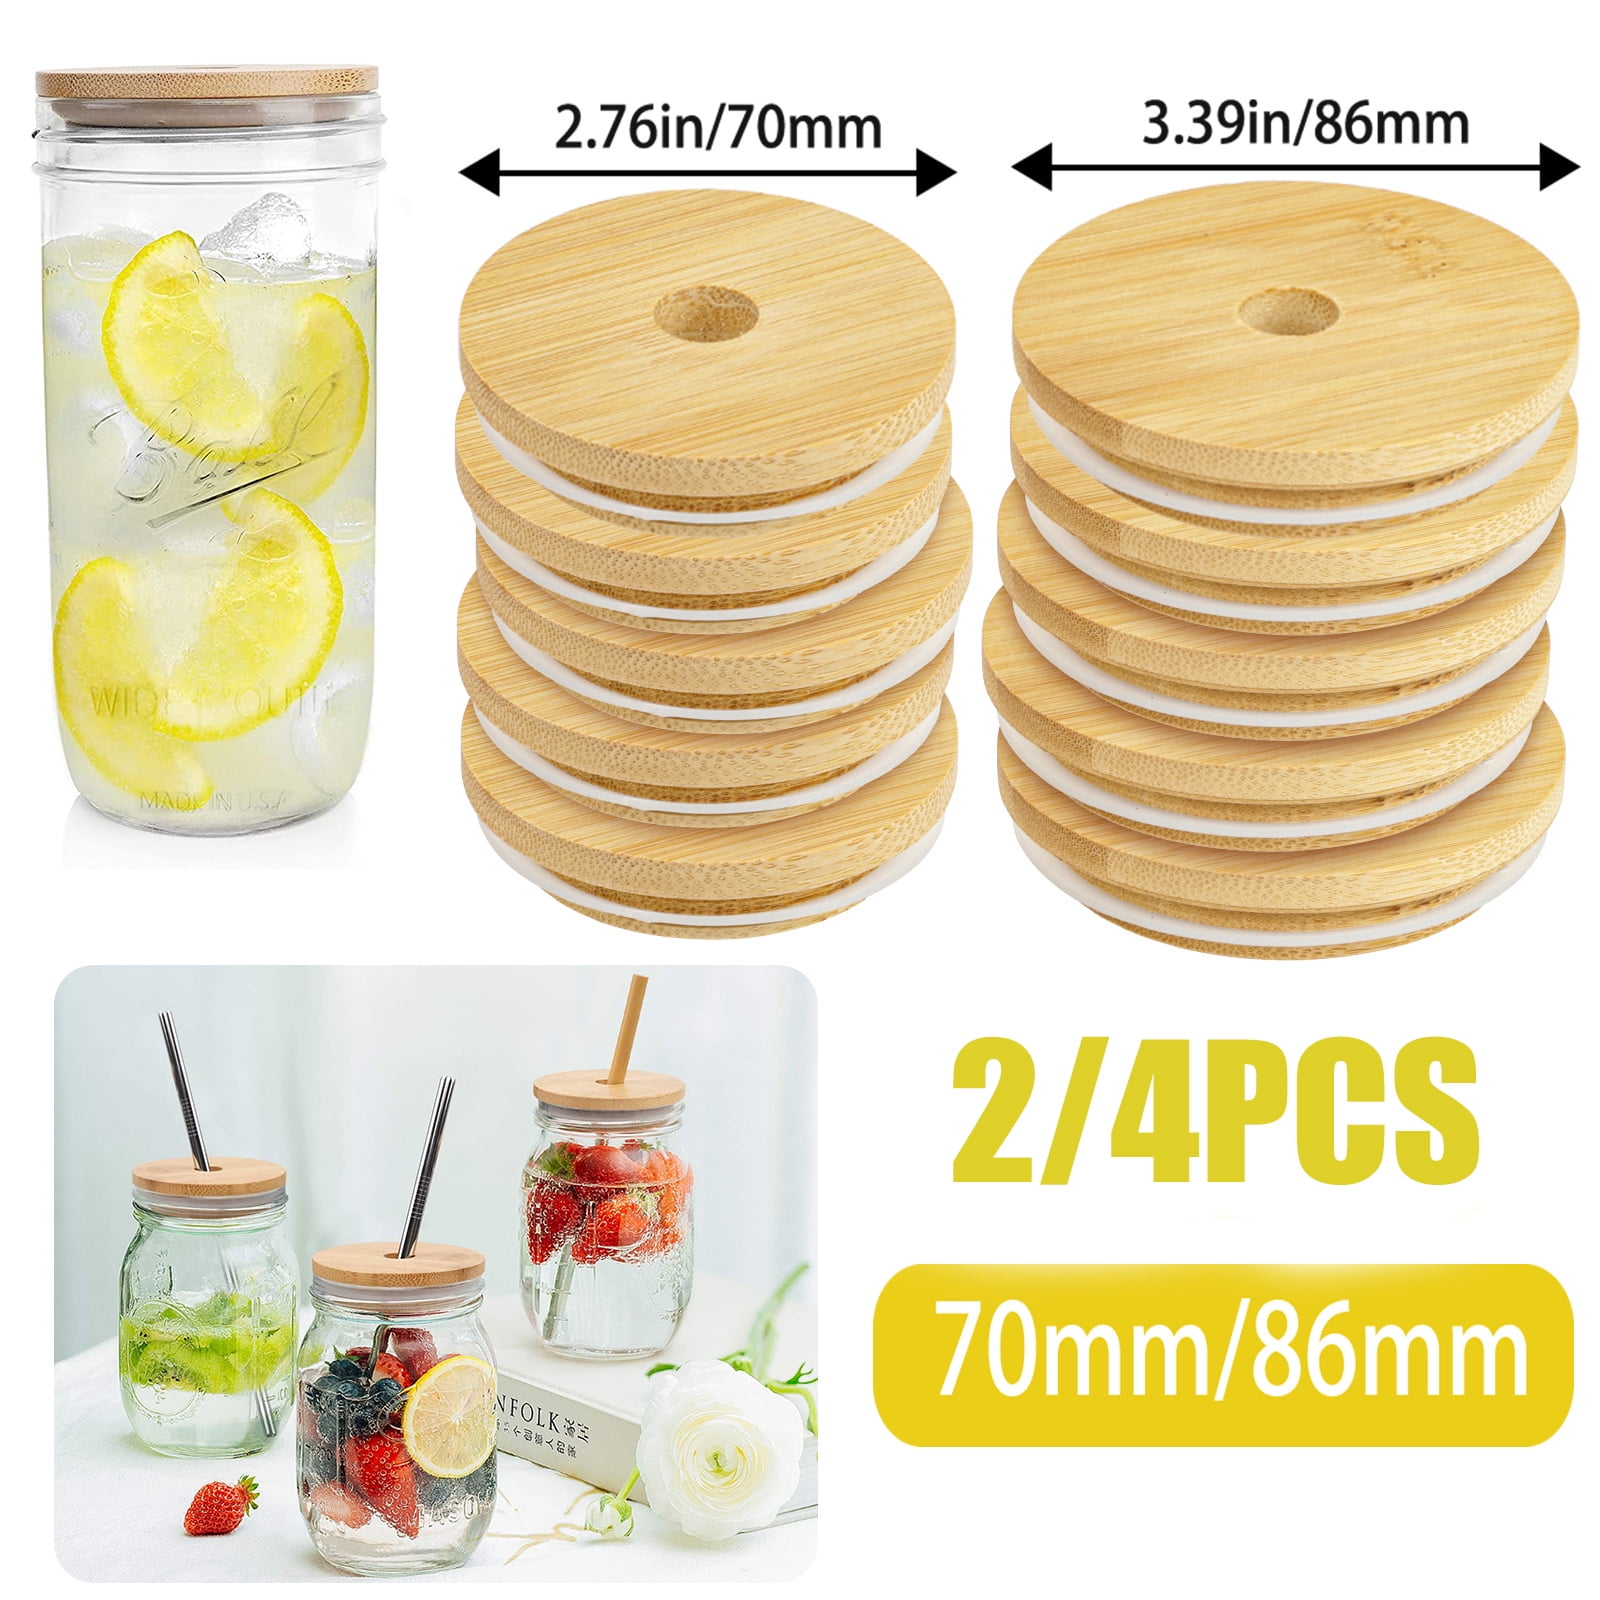 6/12x Plastic Replacement Caps Lids with Straw Hole for Mason Jars Canning Jars 